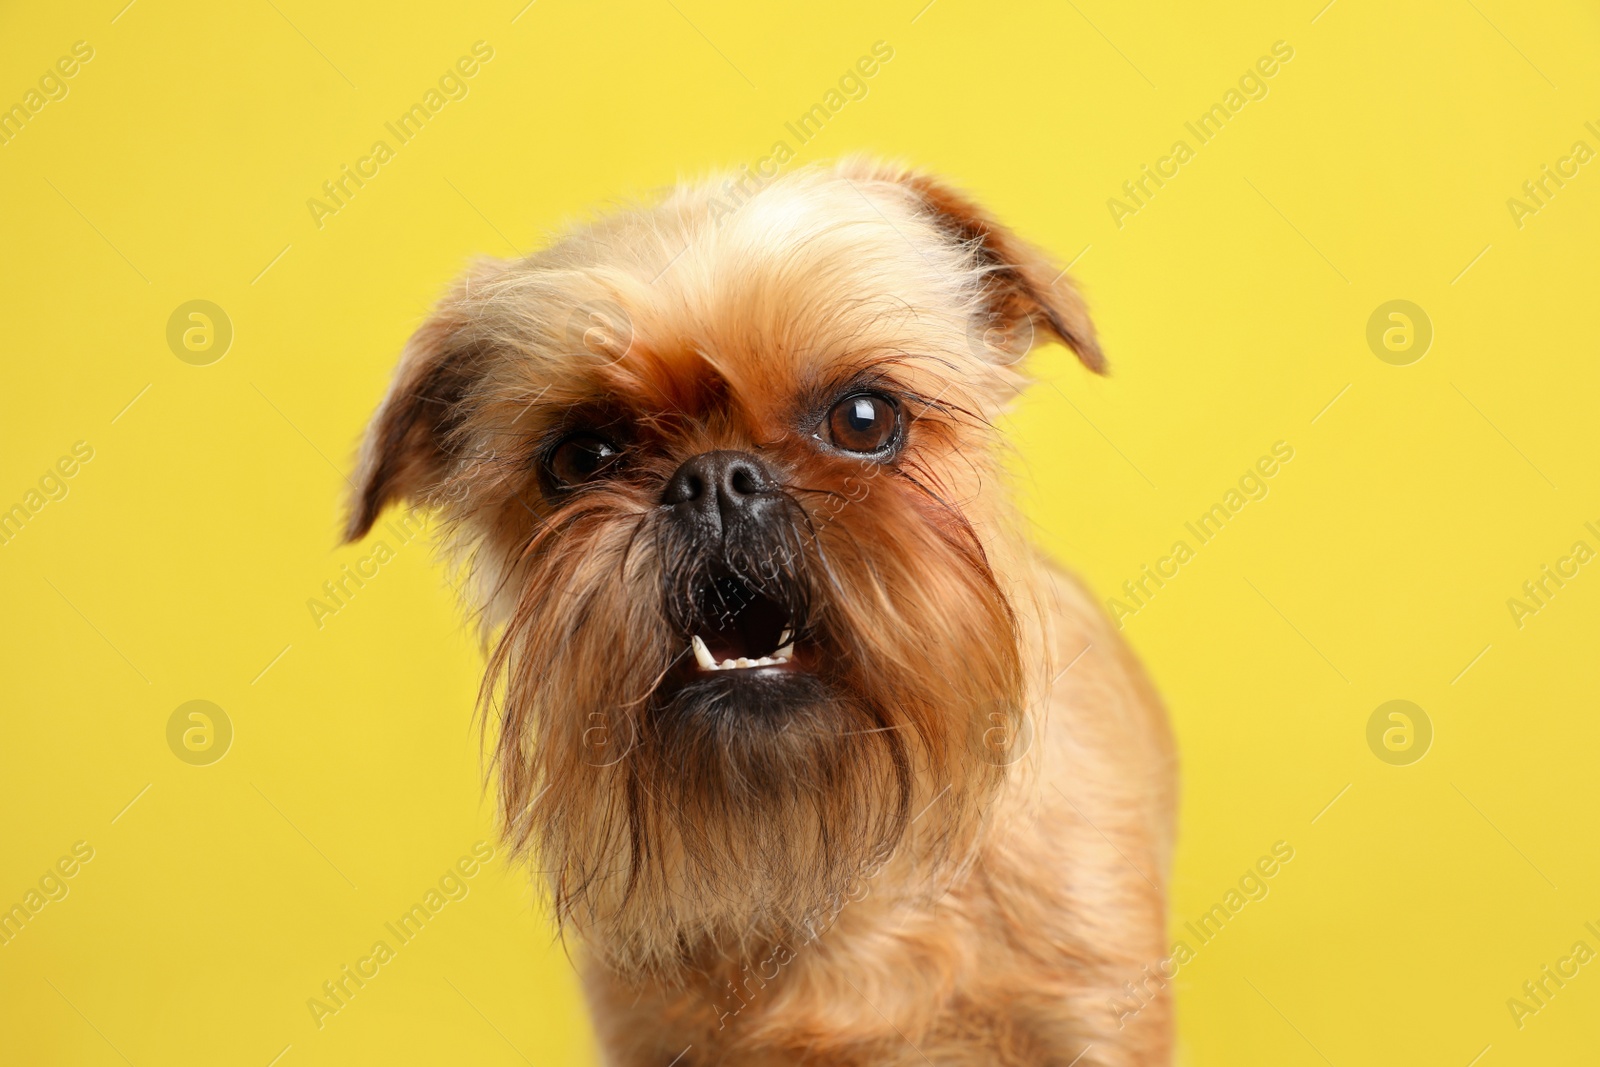 Photo of Studio portrait of funny Brussels Griffon dog looking into camera on color background